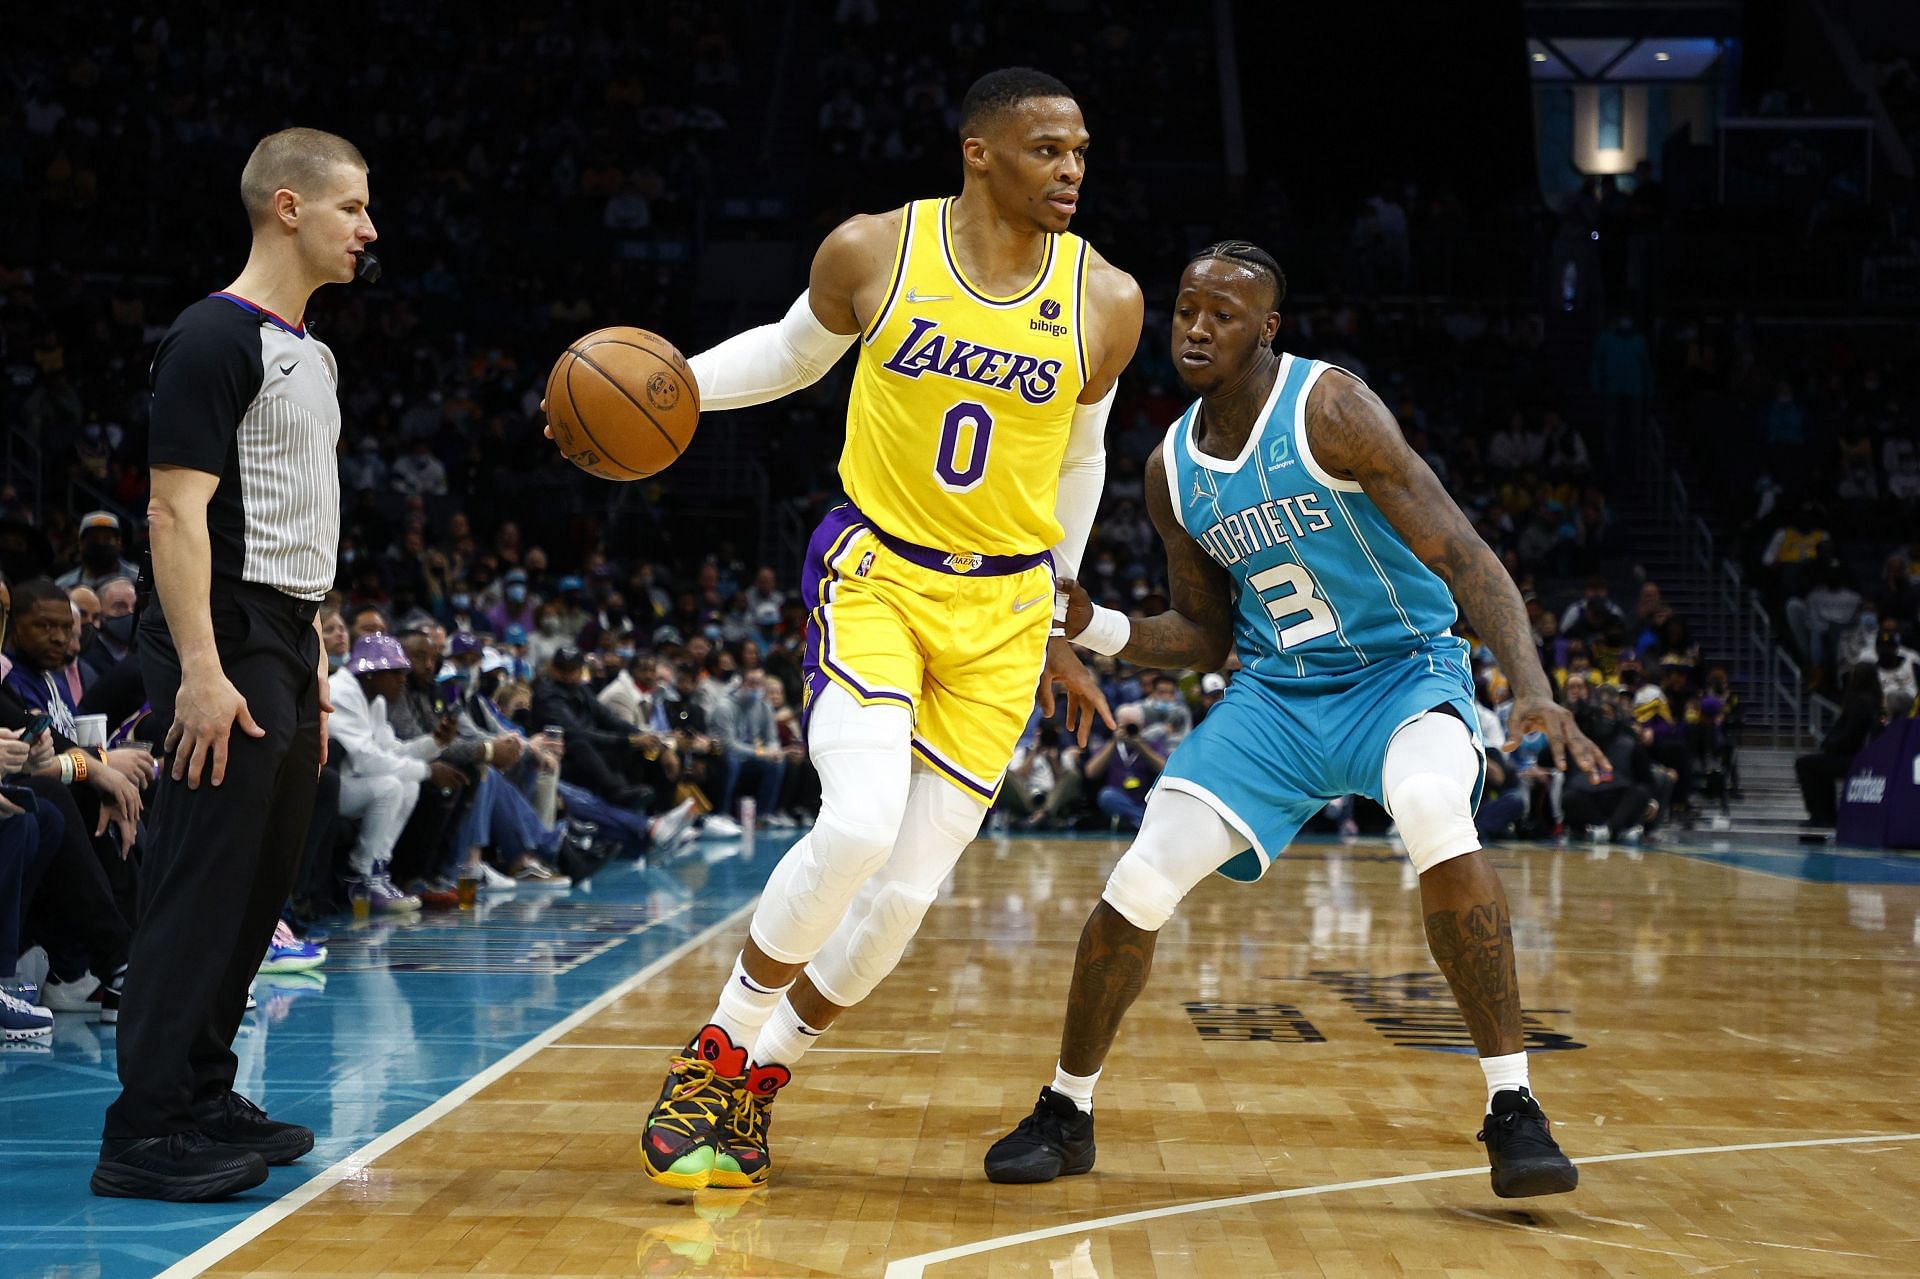 Russell Westbrook #0 of the Los Angeles Lakers dribbles against Terry Rozier #3 of the Charlotte Hornets during the first half of the game at Spectrum Center on January 28, 2022 in Charlotte, North Carolina.